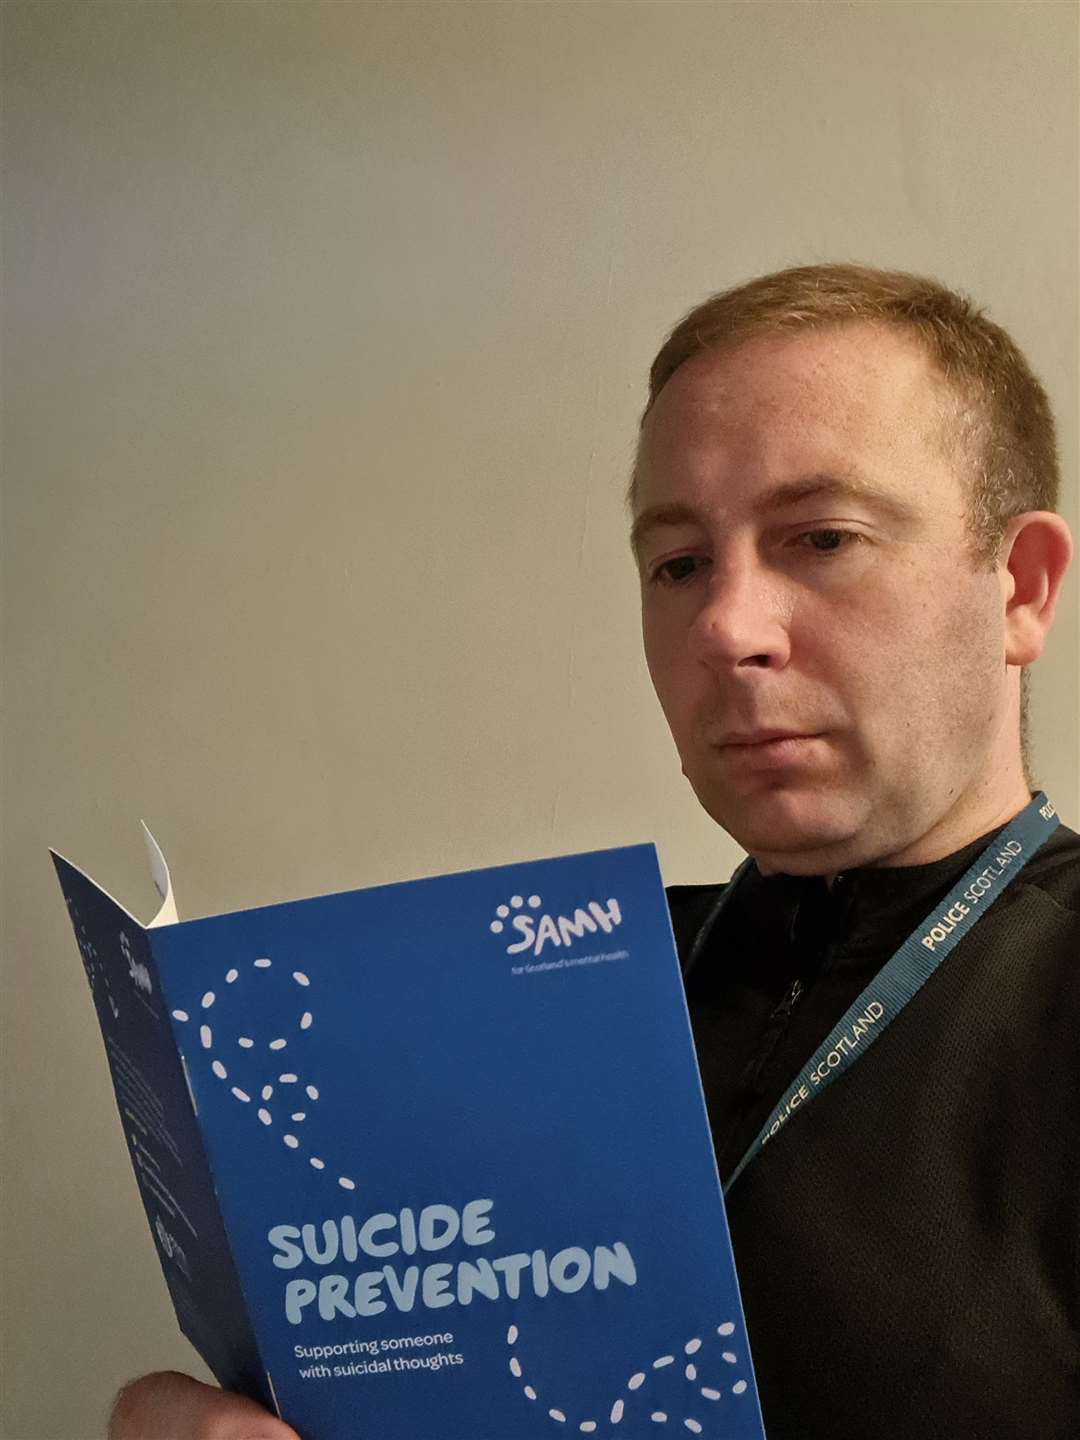 PC Johnathan Davis with the suicide prevention materials.